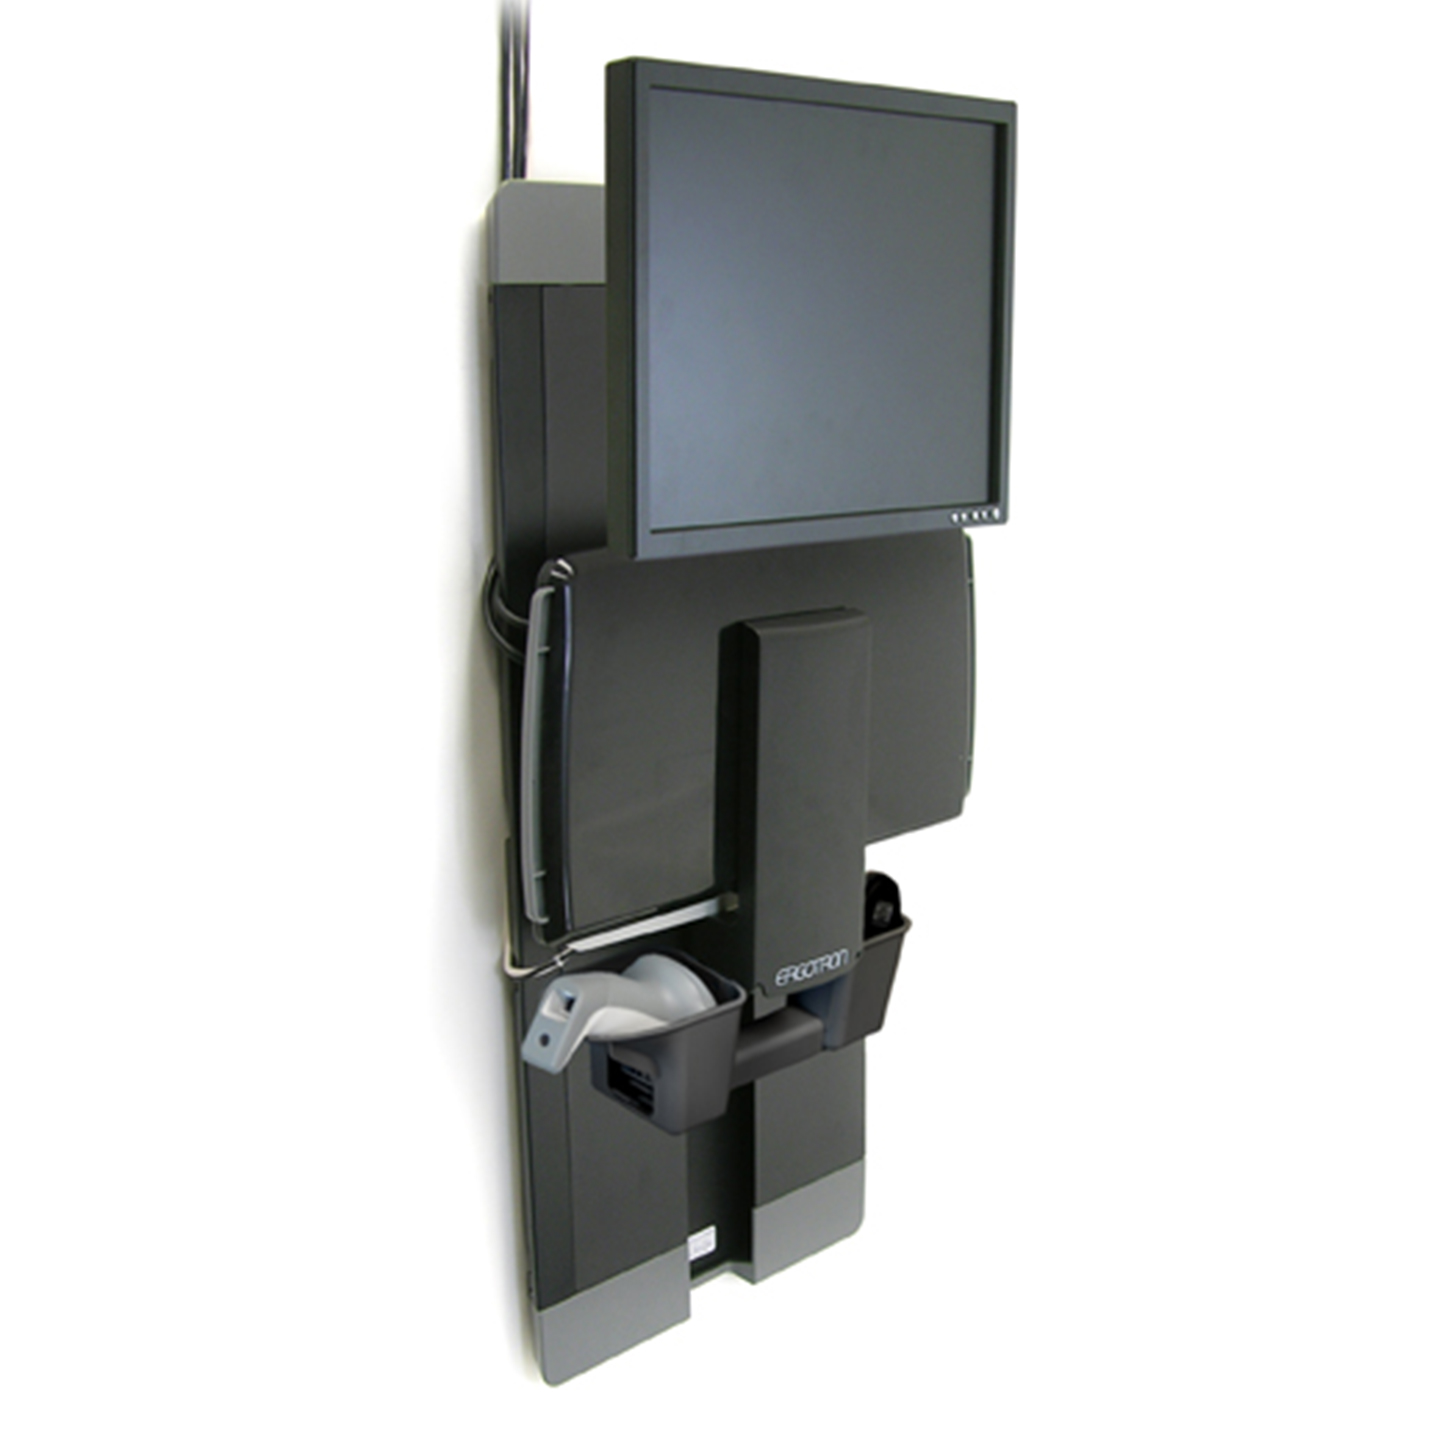 Haworth StyleView Sit to Stand Workspace in black color folded up against wall 